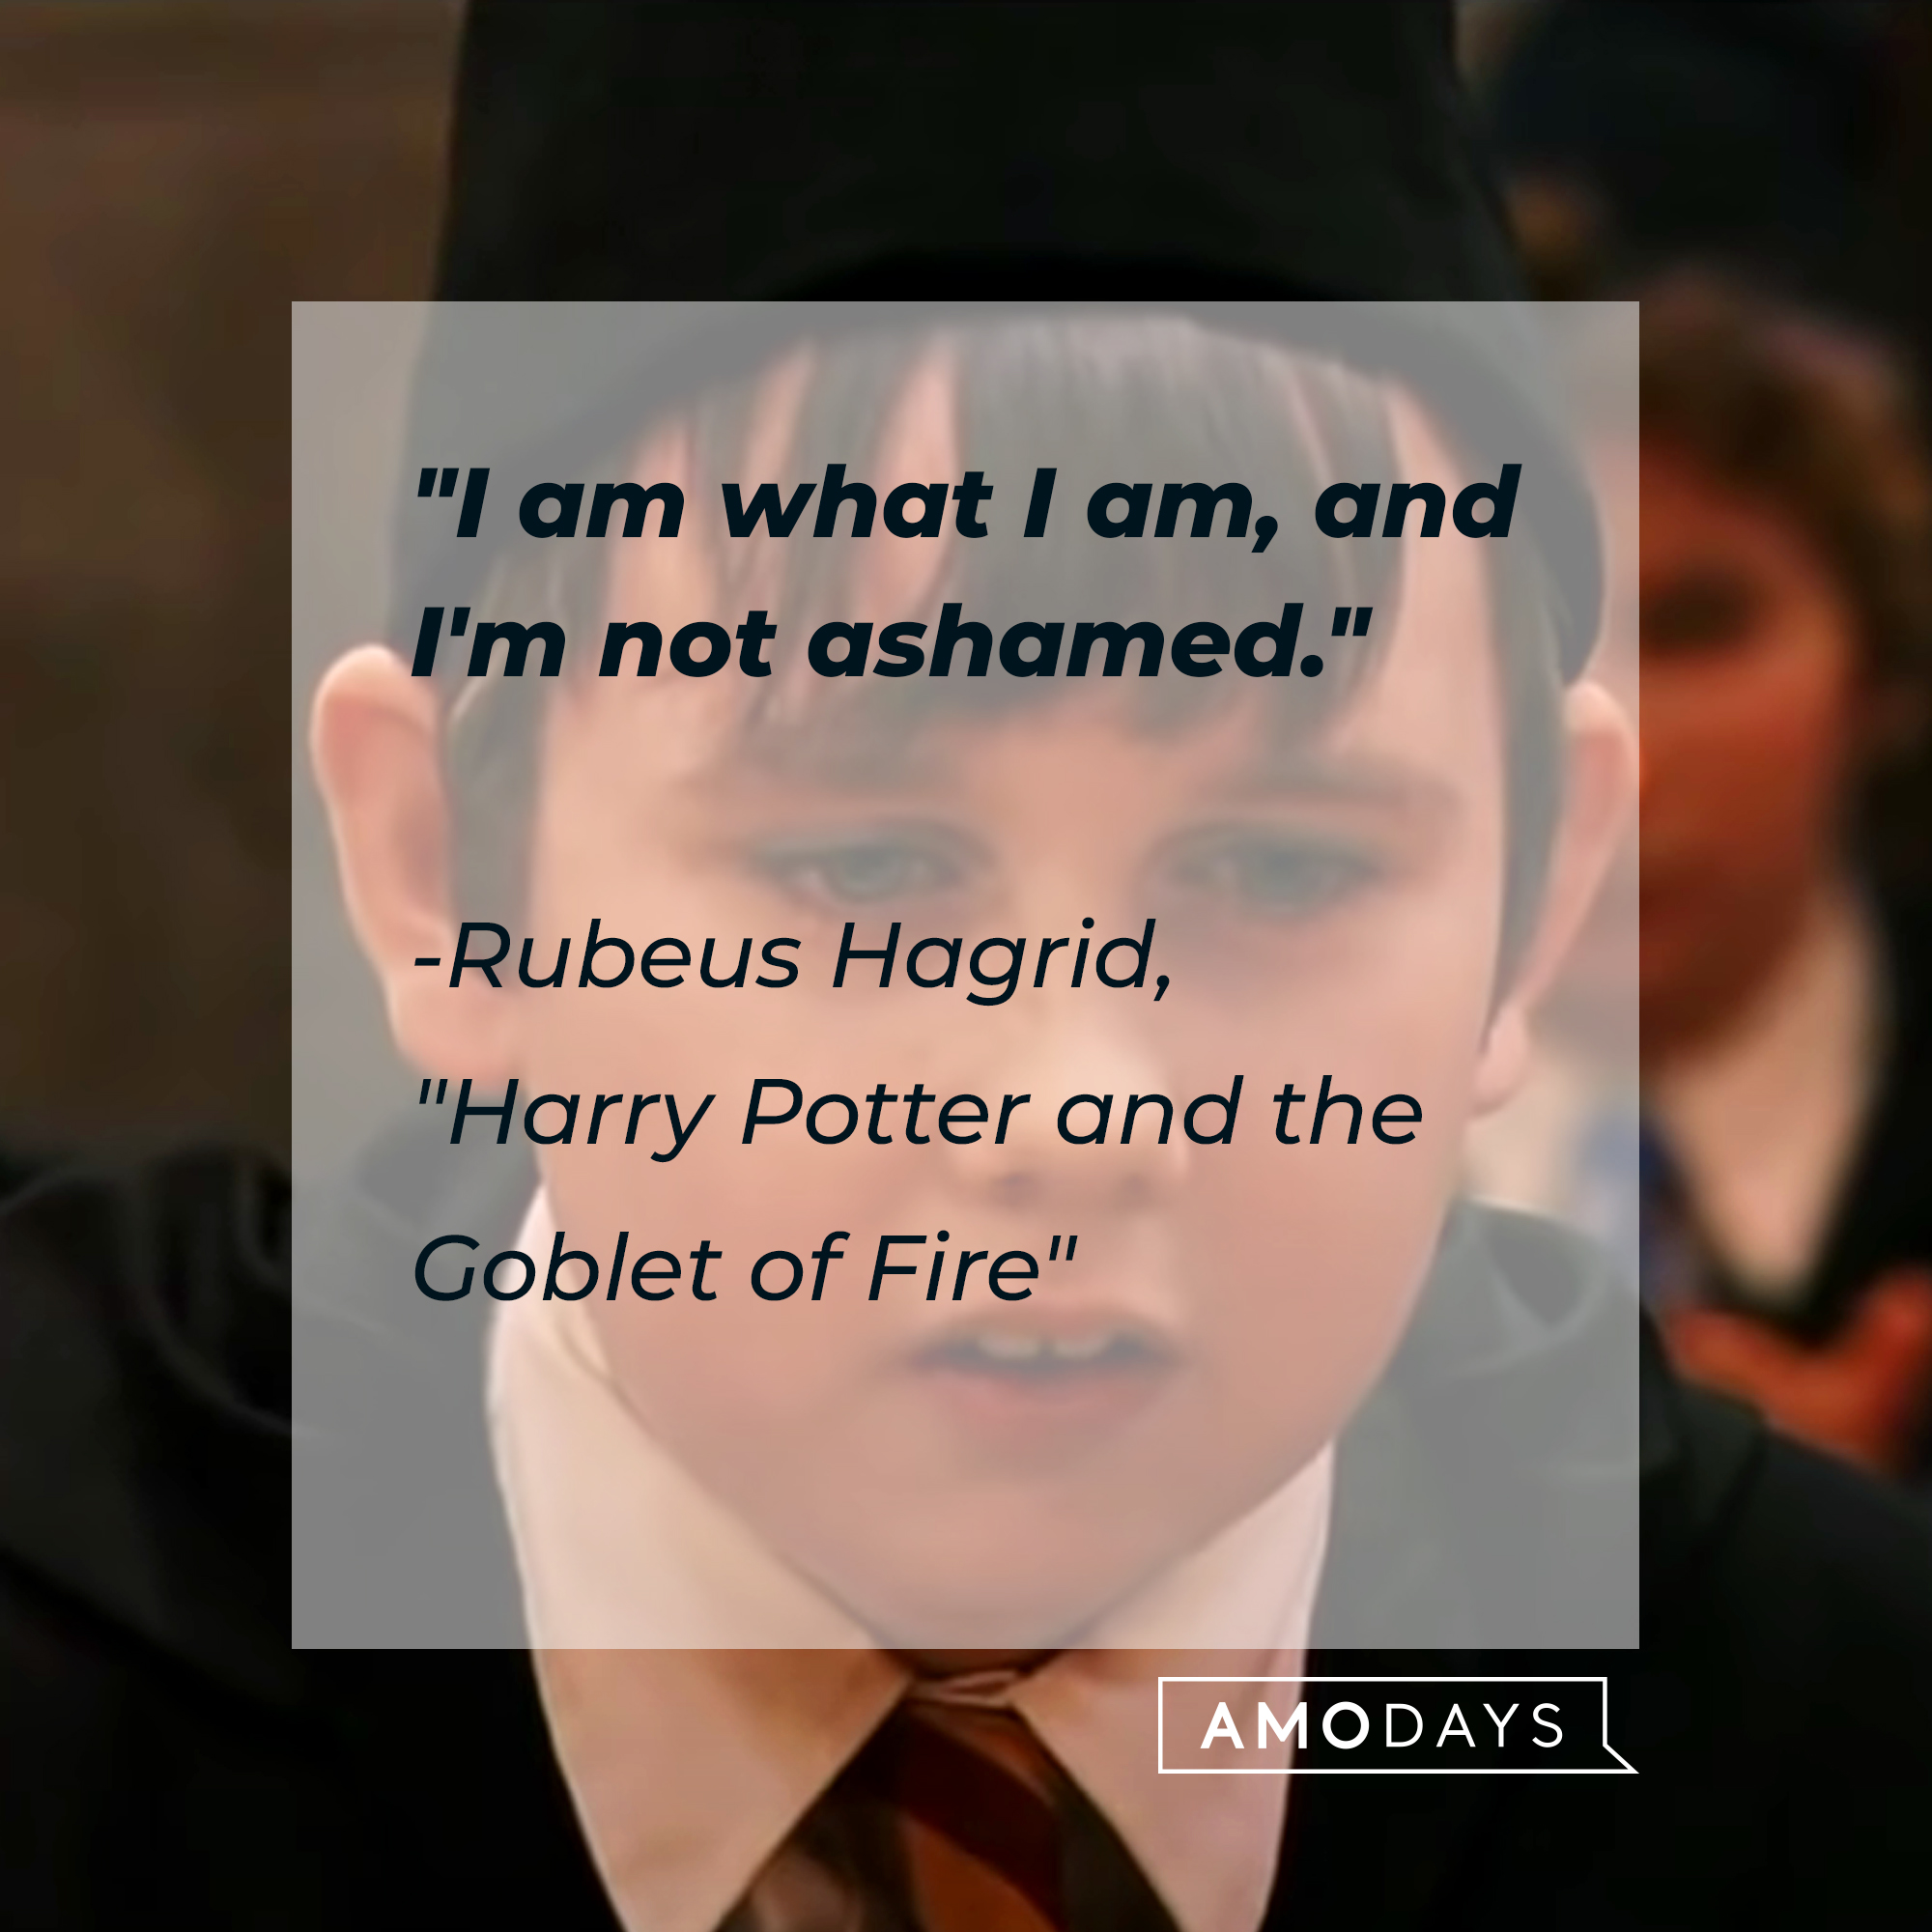 Rubeus Hagrid, with his Albus Dumbledore's quote: "I am what I am, and I'm not ashamed." | Source: Facebook.com/harrypotter